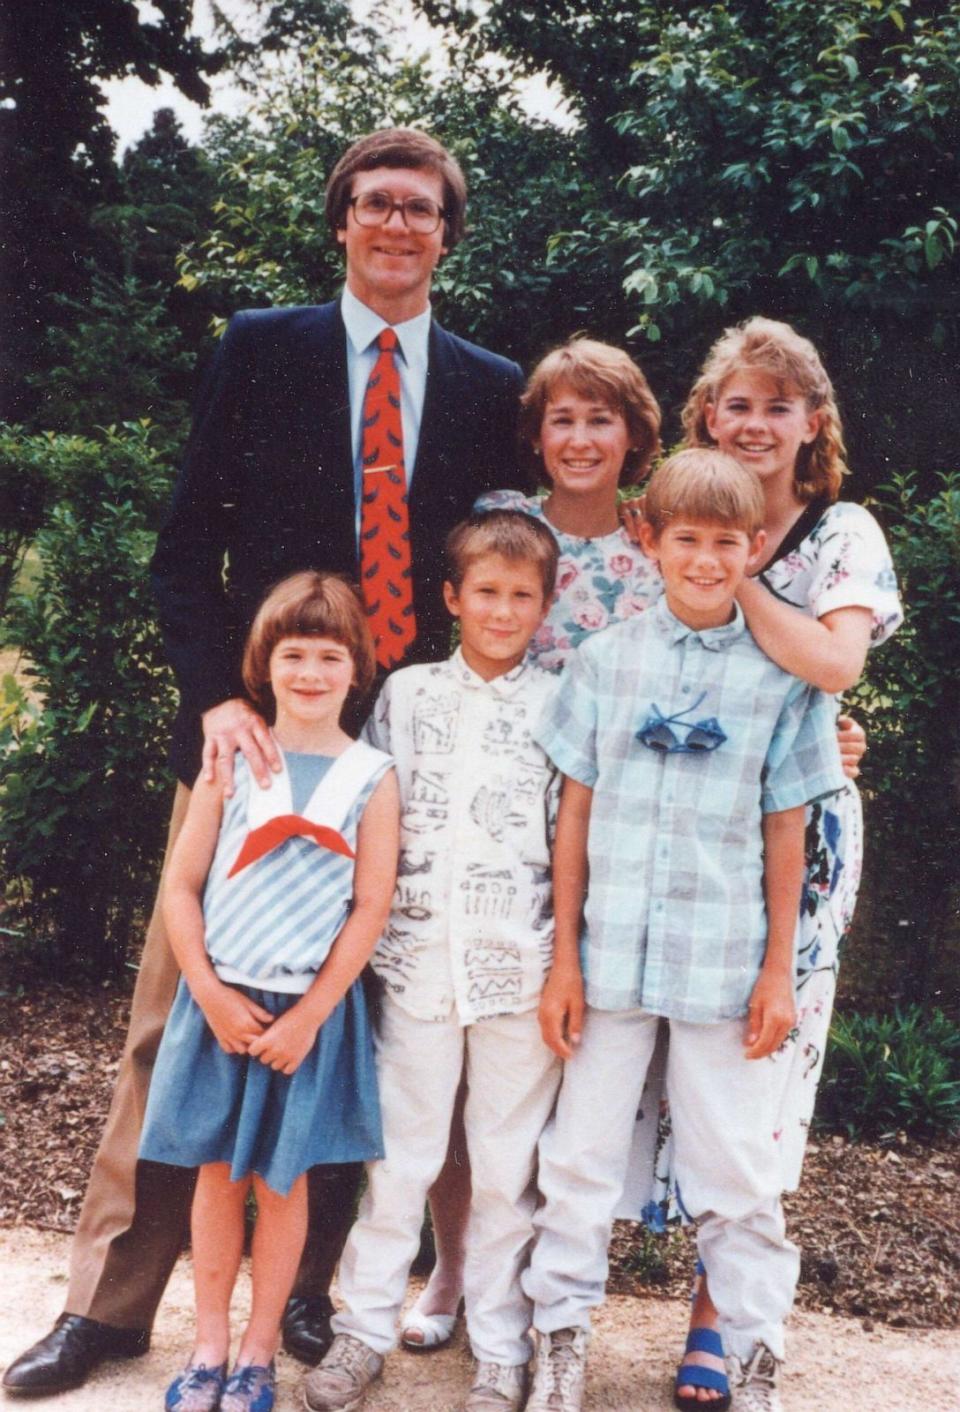 PHOTO: Jacob Wetterling (R, front row) is seen in an undated family photo. (Courtesy of Patty Wetterling)